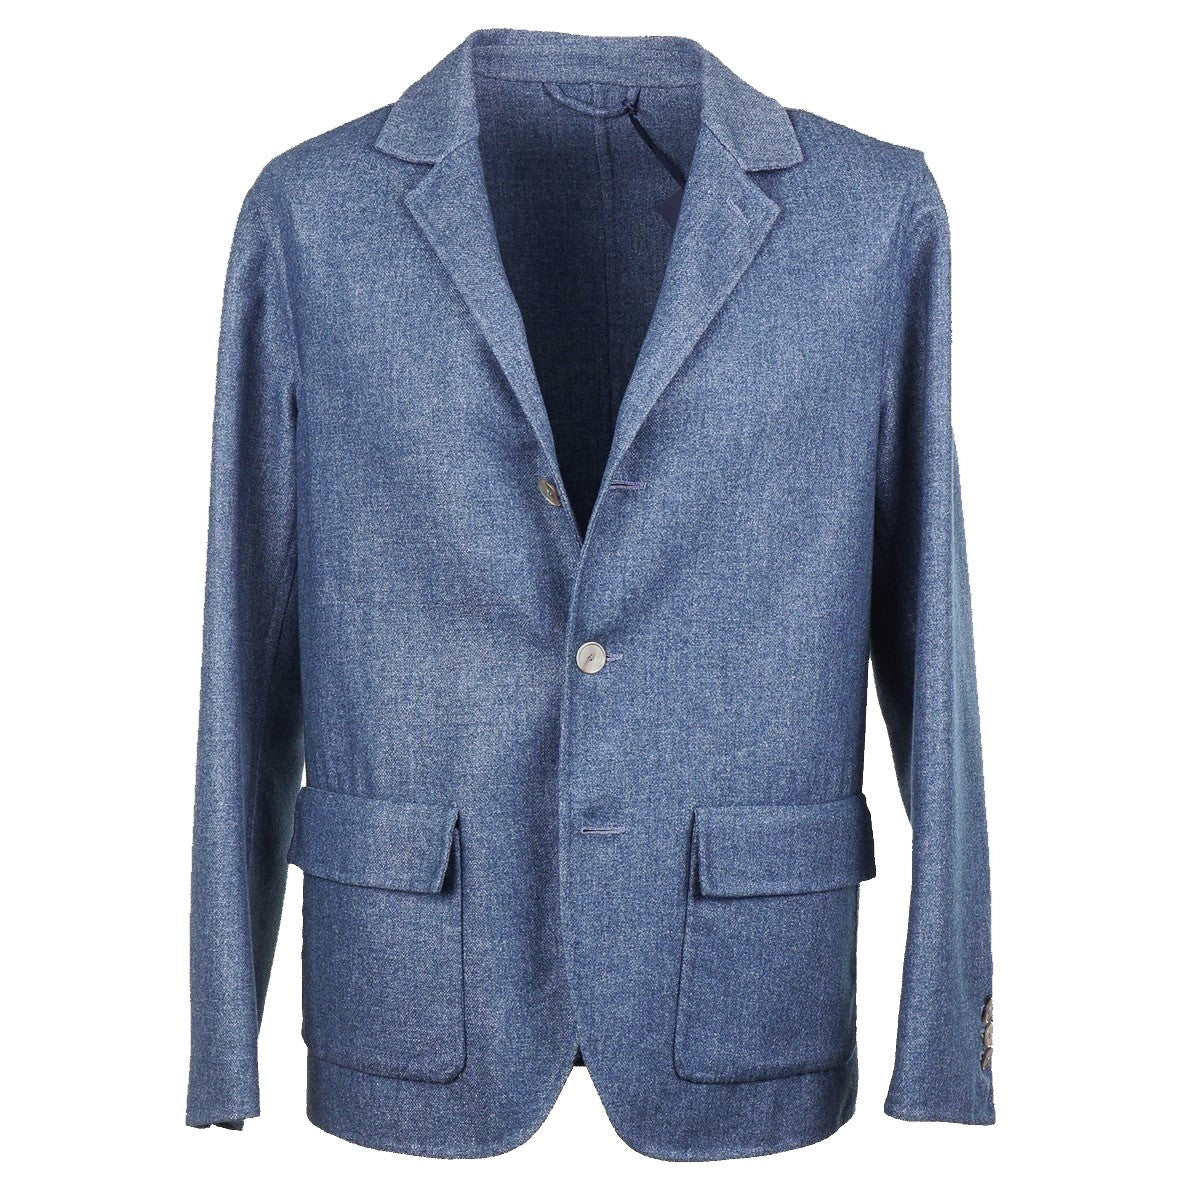 Finamore Deconstructed Relaxed-Fit Sport Coat - Top Shelf Apparel